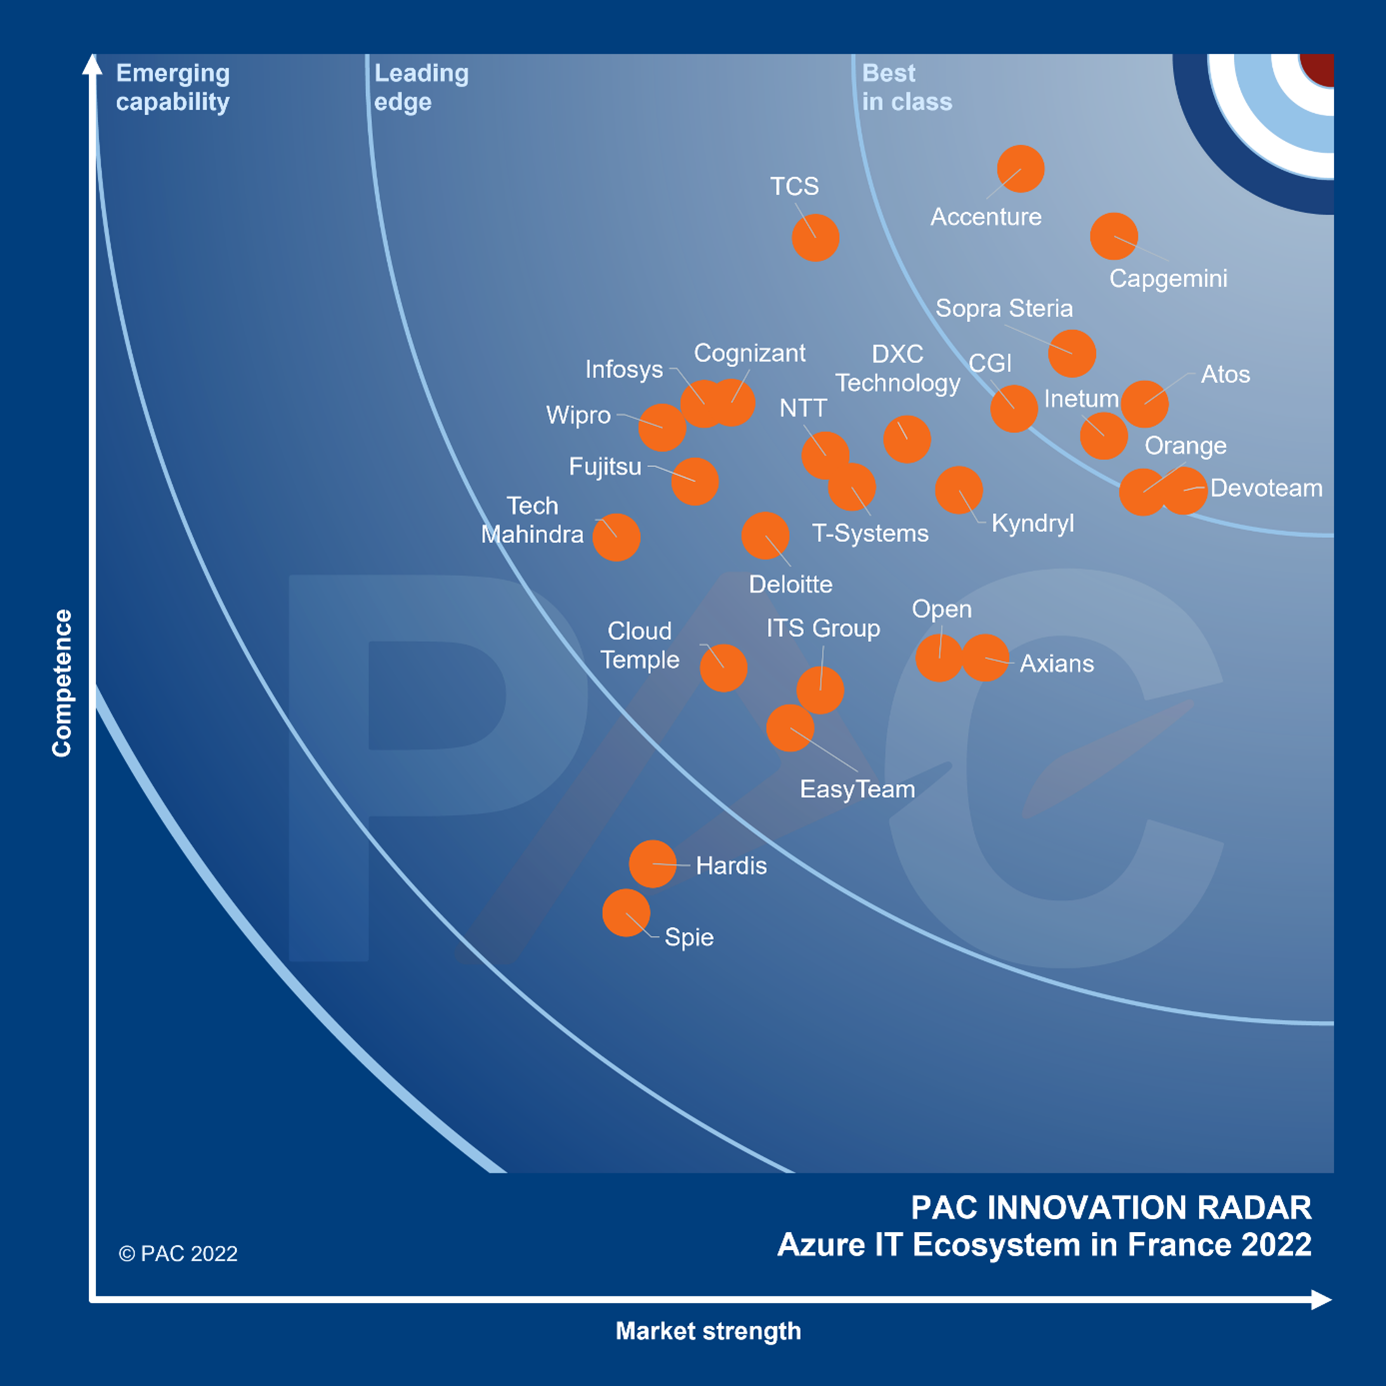 Orange Business recognized as a leader in the PAC Radar - Azure IT Ecosystem 2022